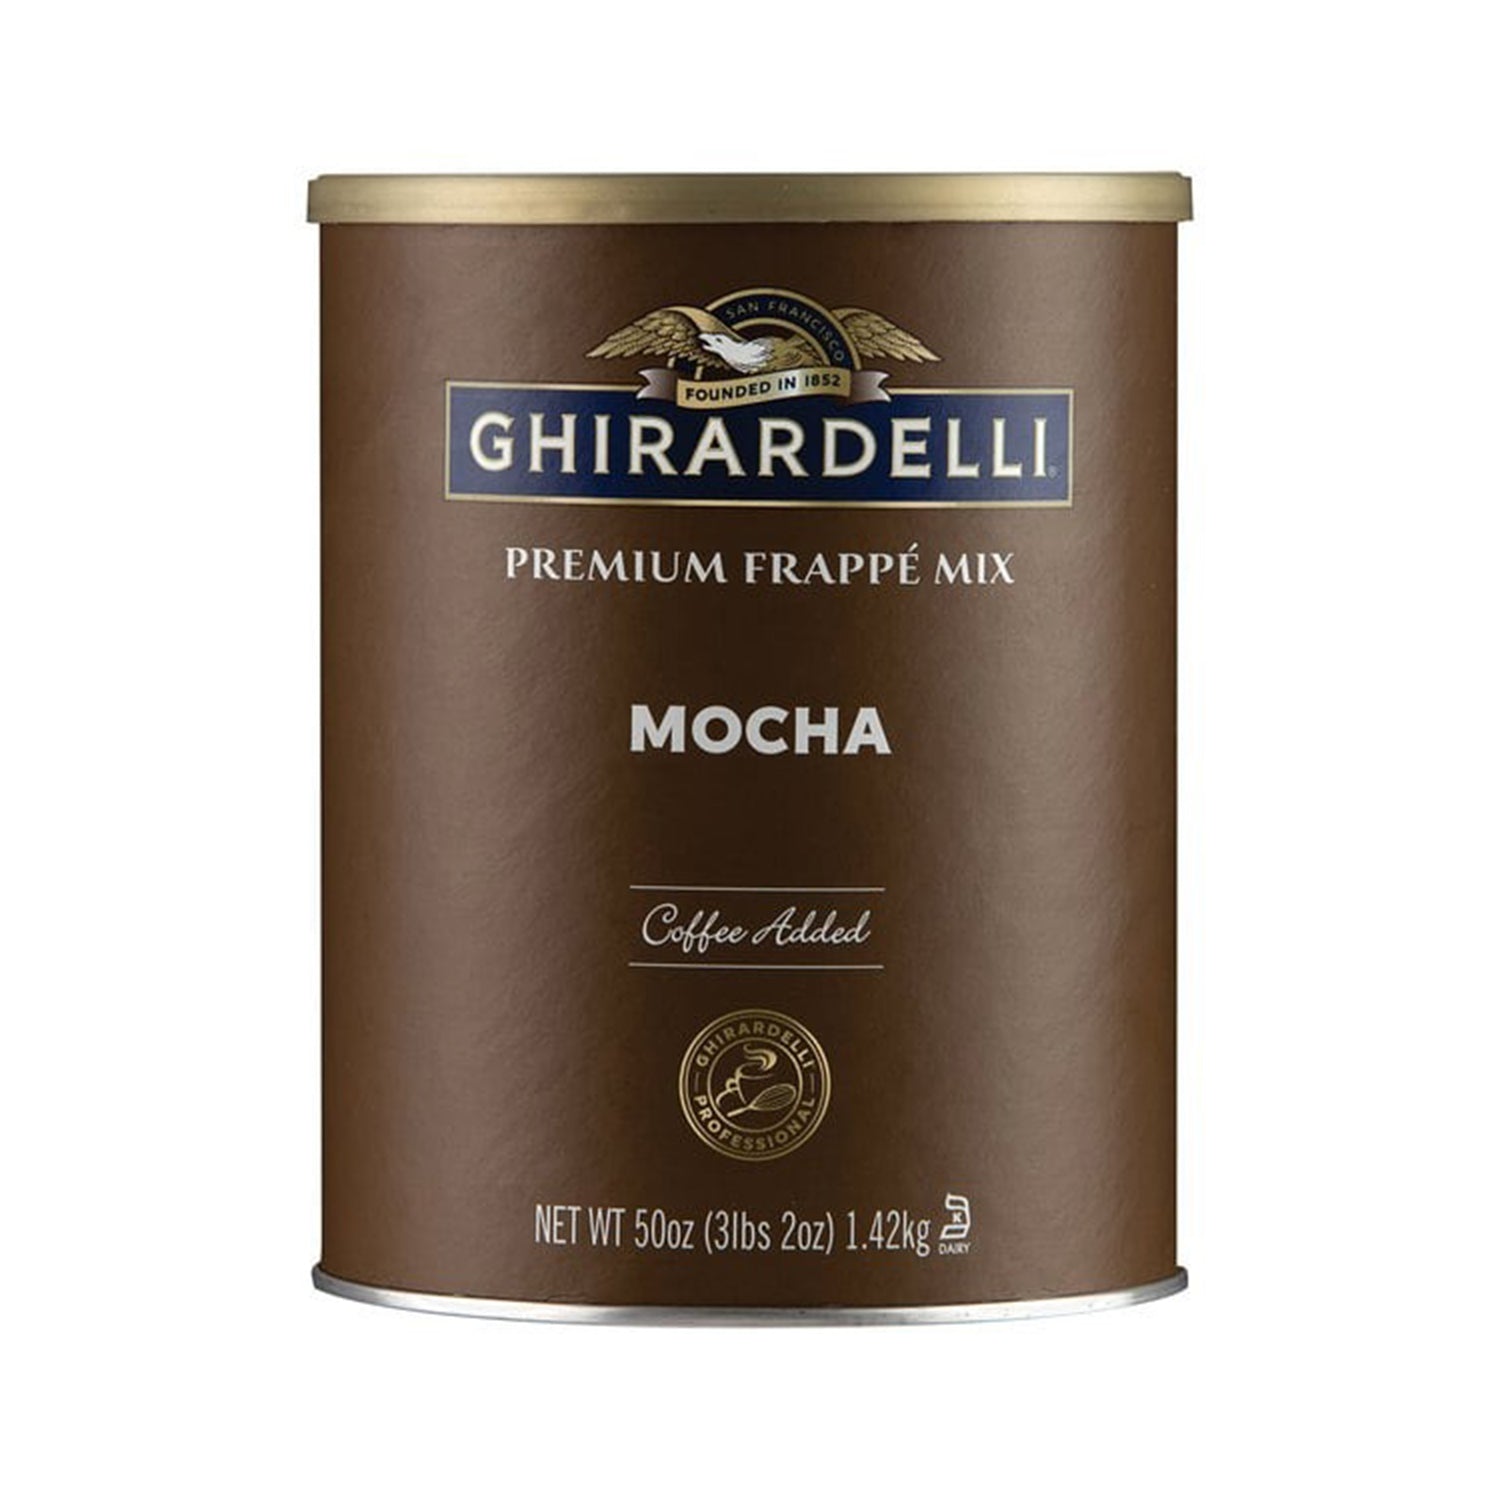 Ghirardelli Mocha Frappe with Coffee Add Mix in Brown 3.12 lb caned